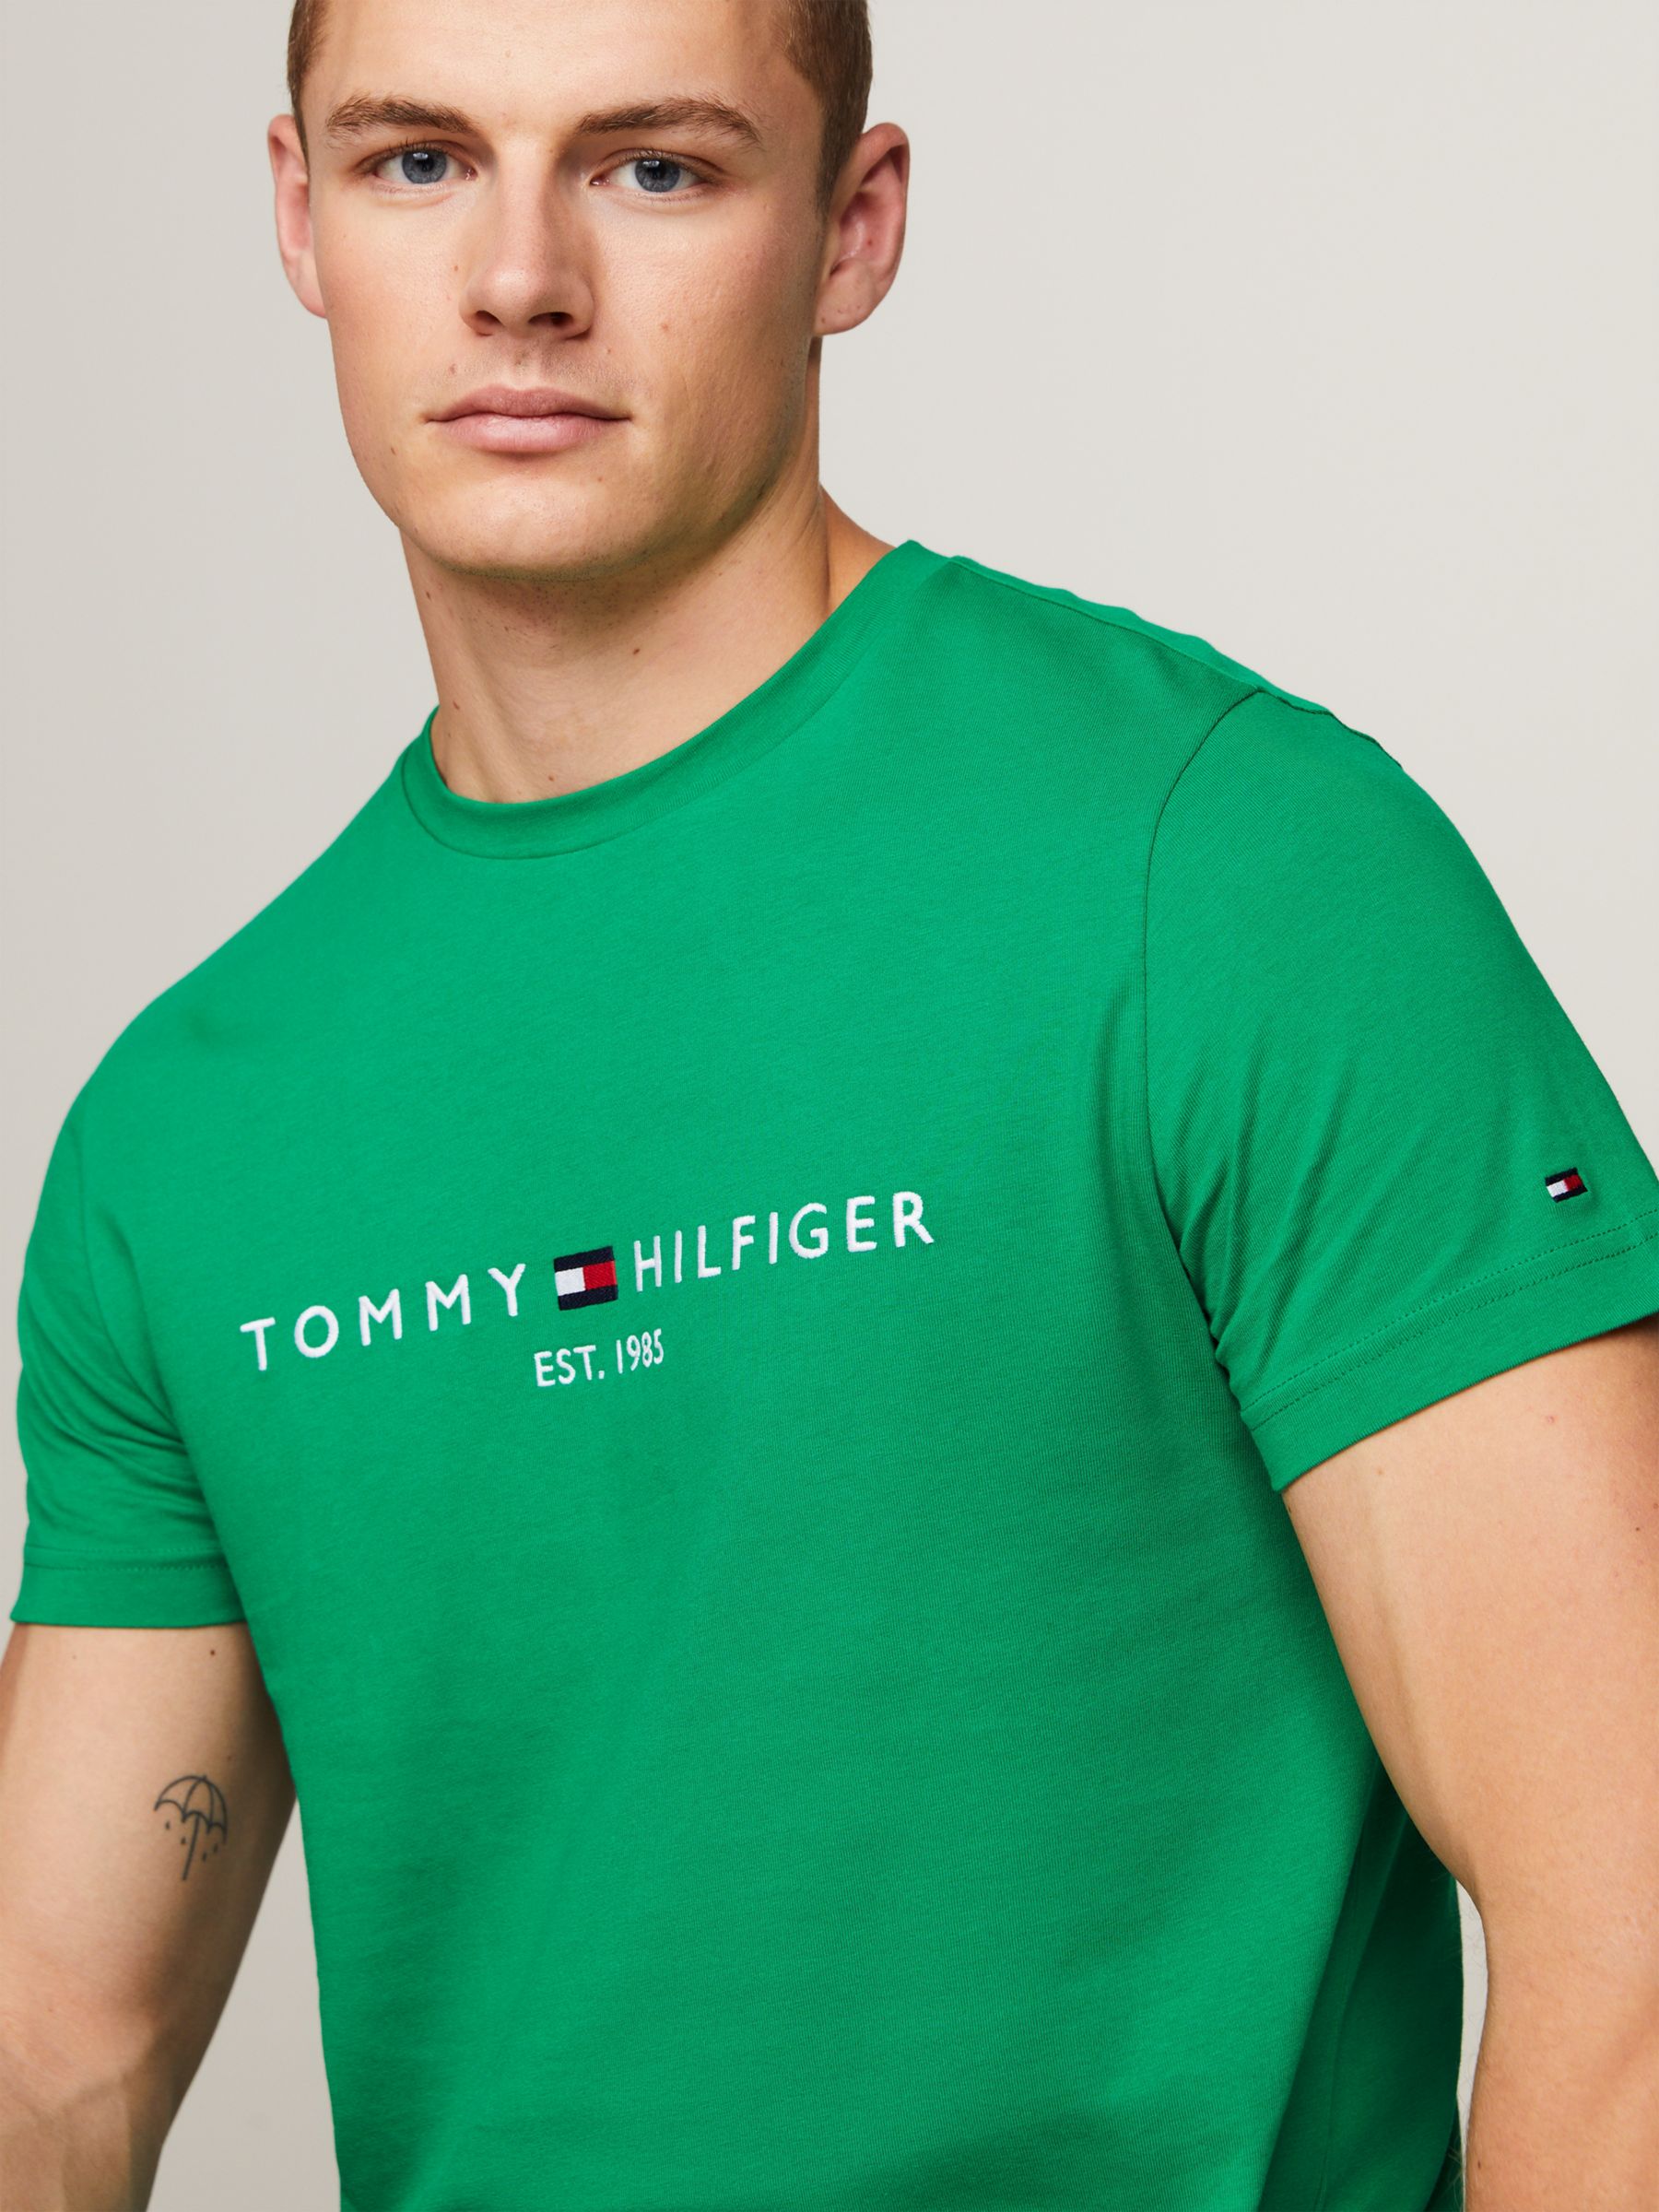 Tommy Hilfiger Cotton Logo Top, Olympic Green, XXL